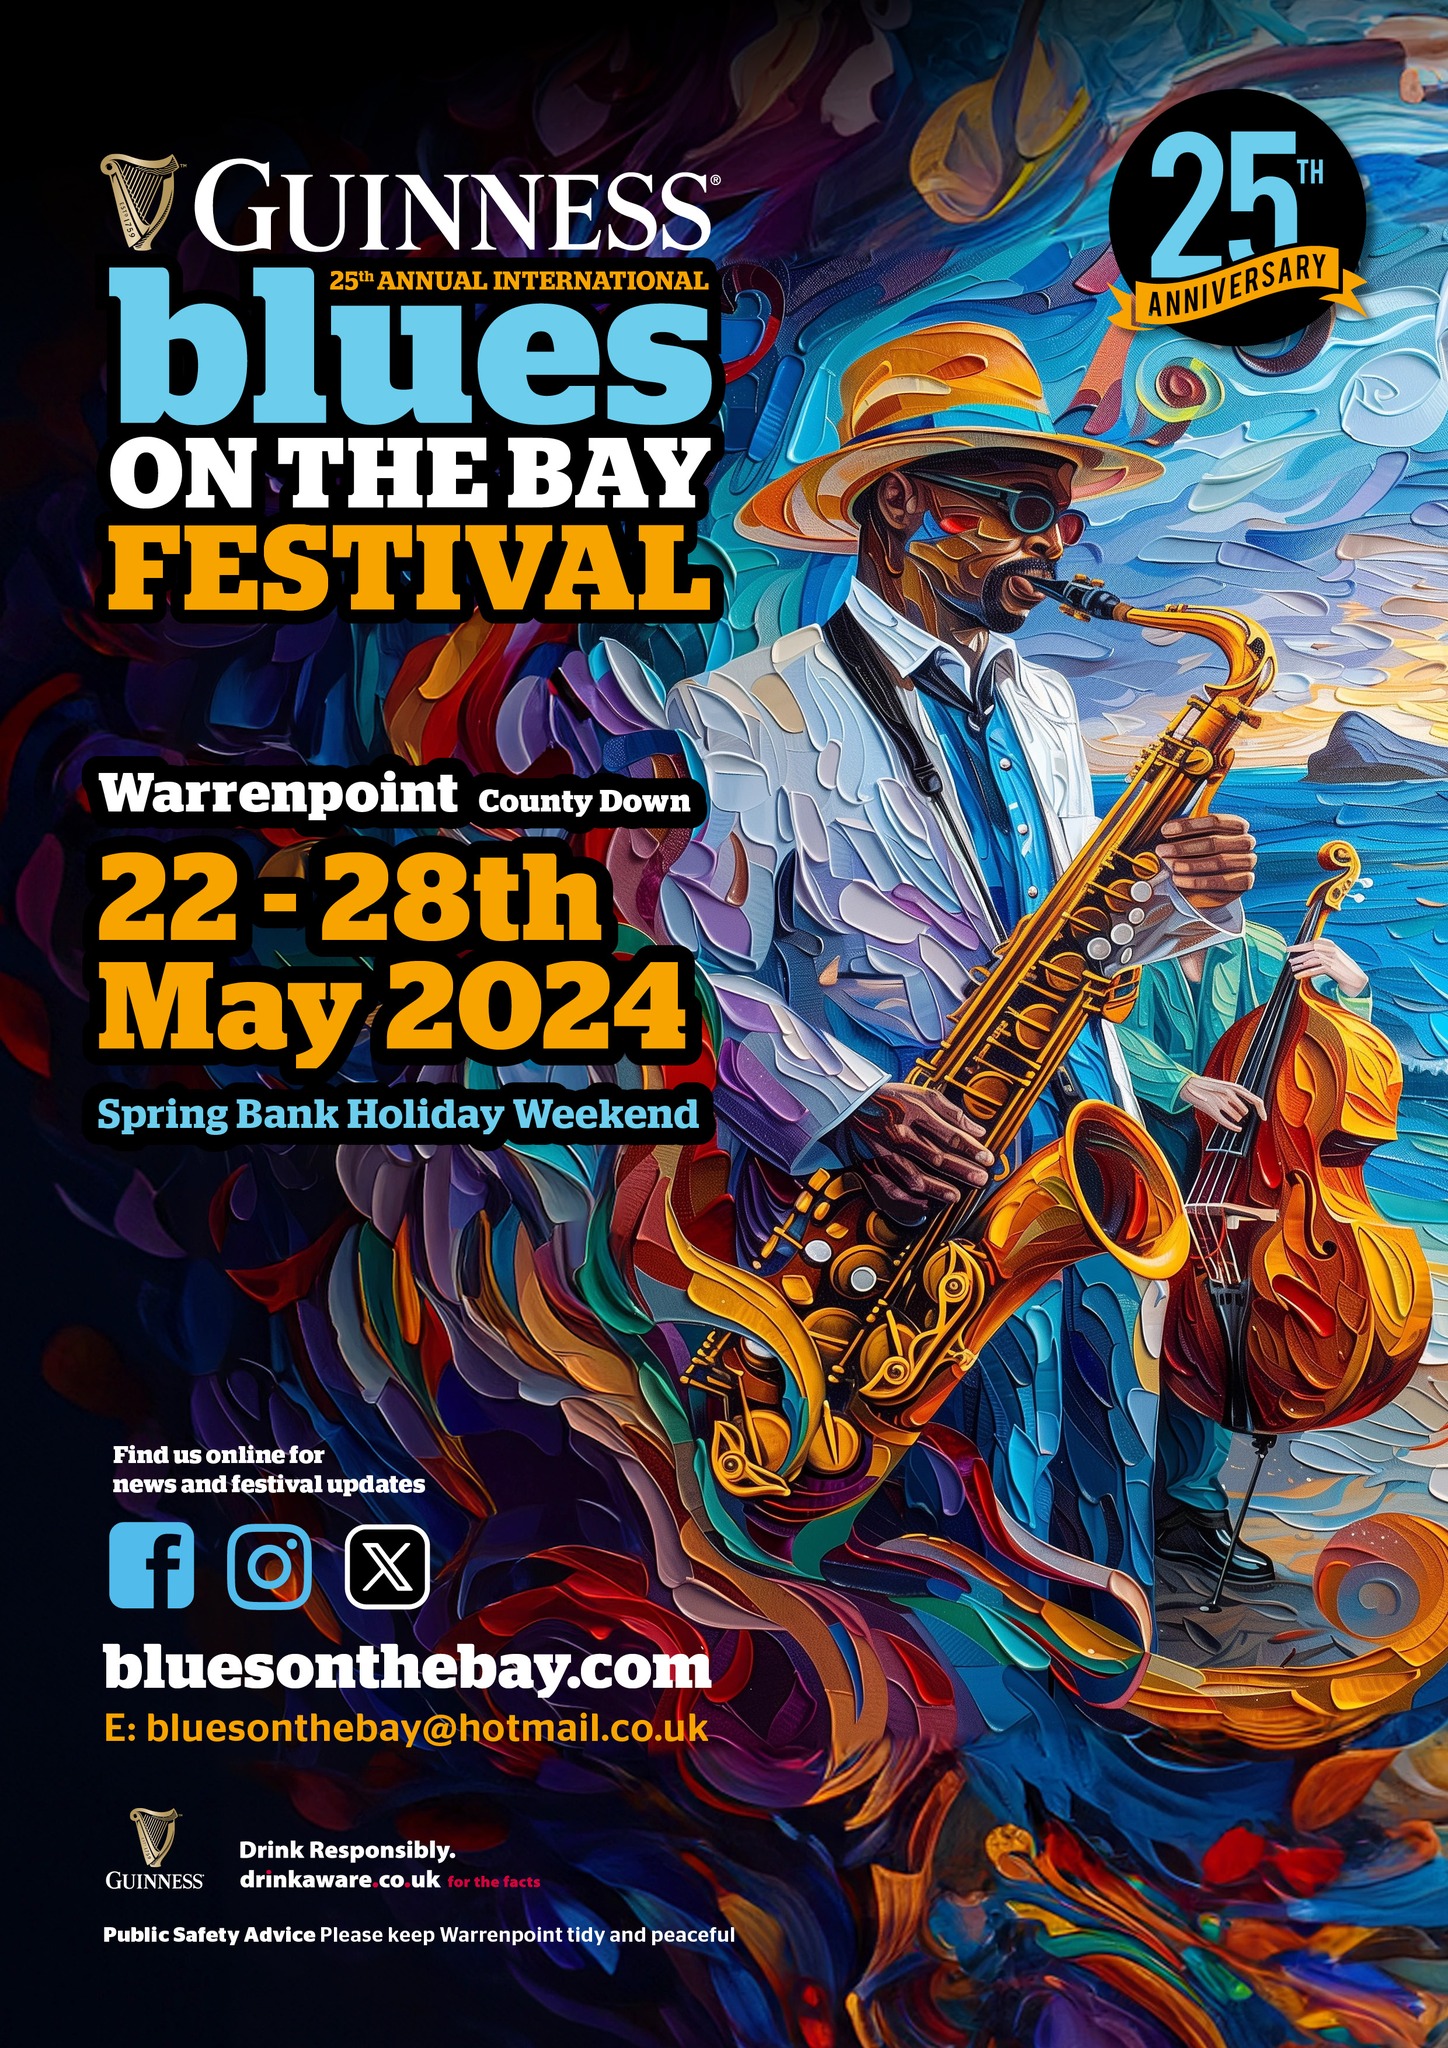 International Guinness Blues on the Bay Festival Warrenpoint Featured Image